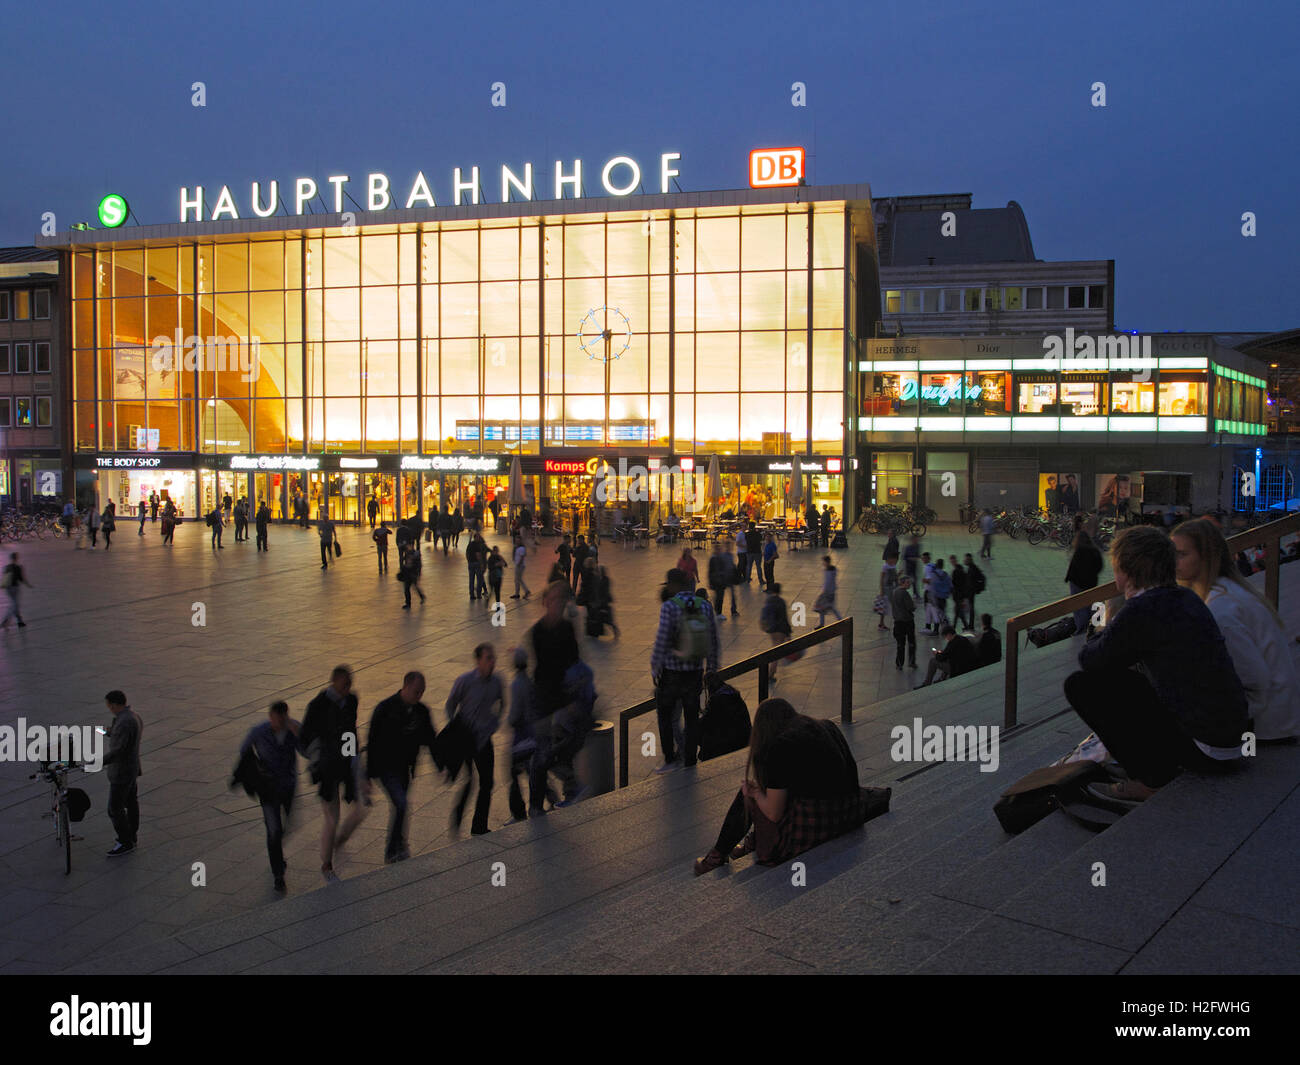 Cologne central station hauptbahnhof at night with many people on the square, Cologne, Germany Stock Photo